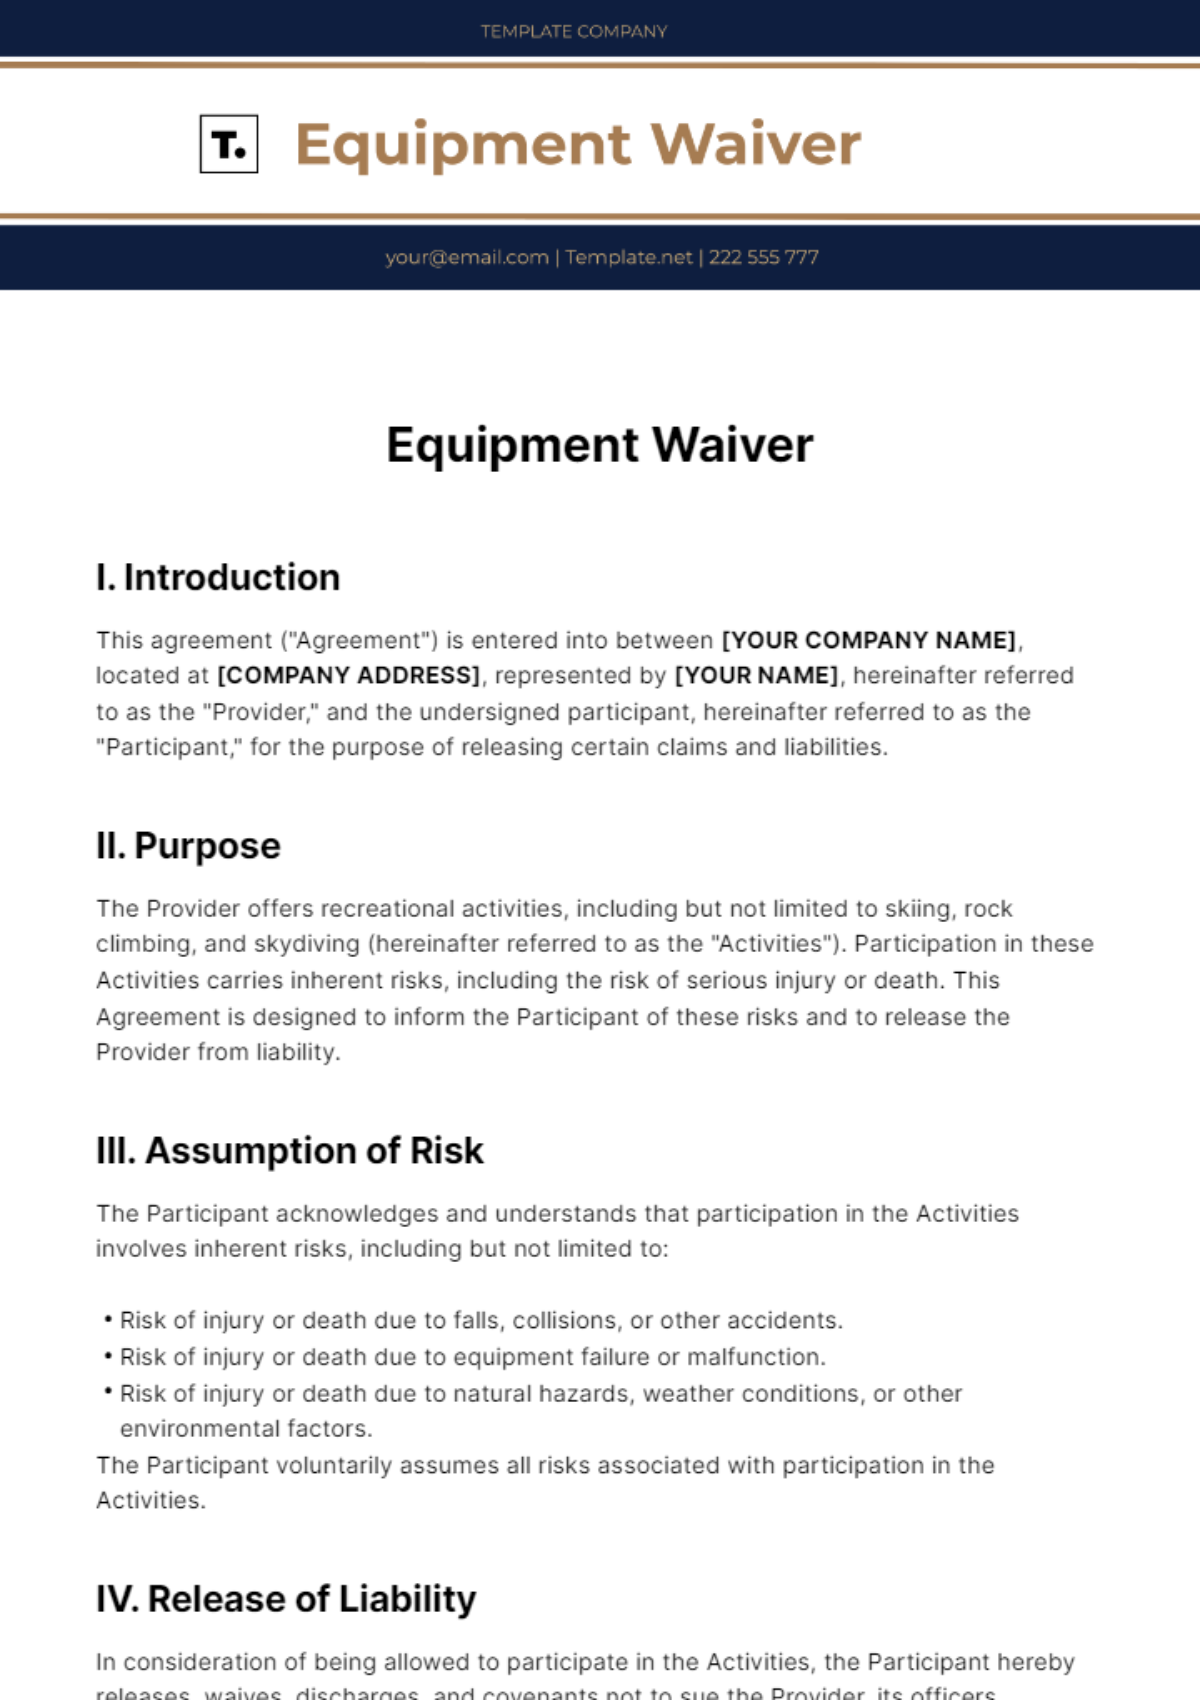 Free Equipment Waiver Template